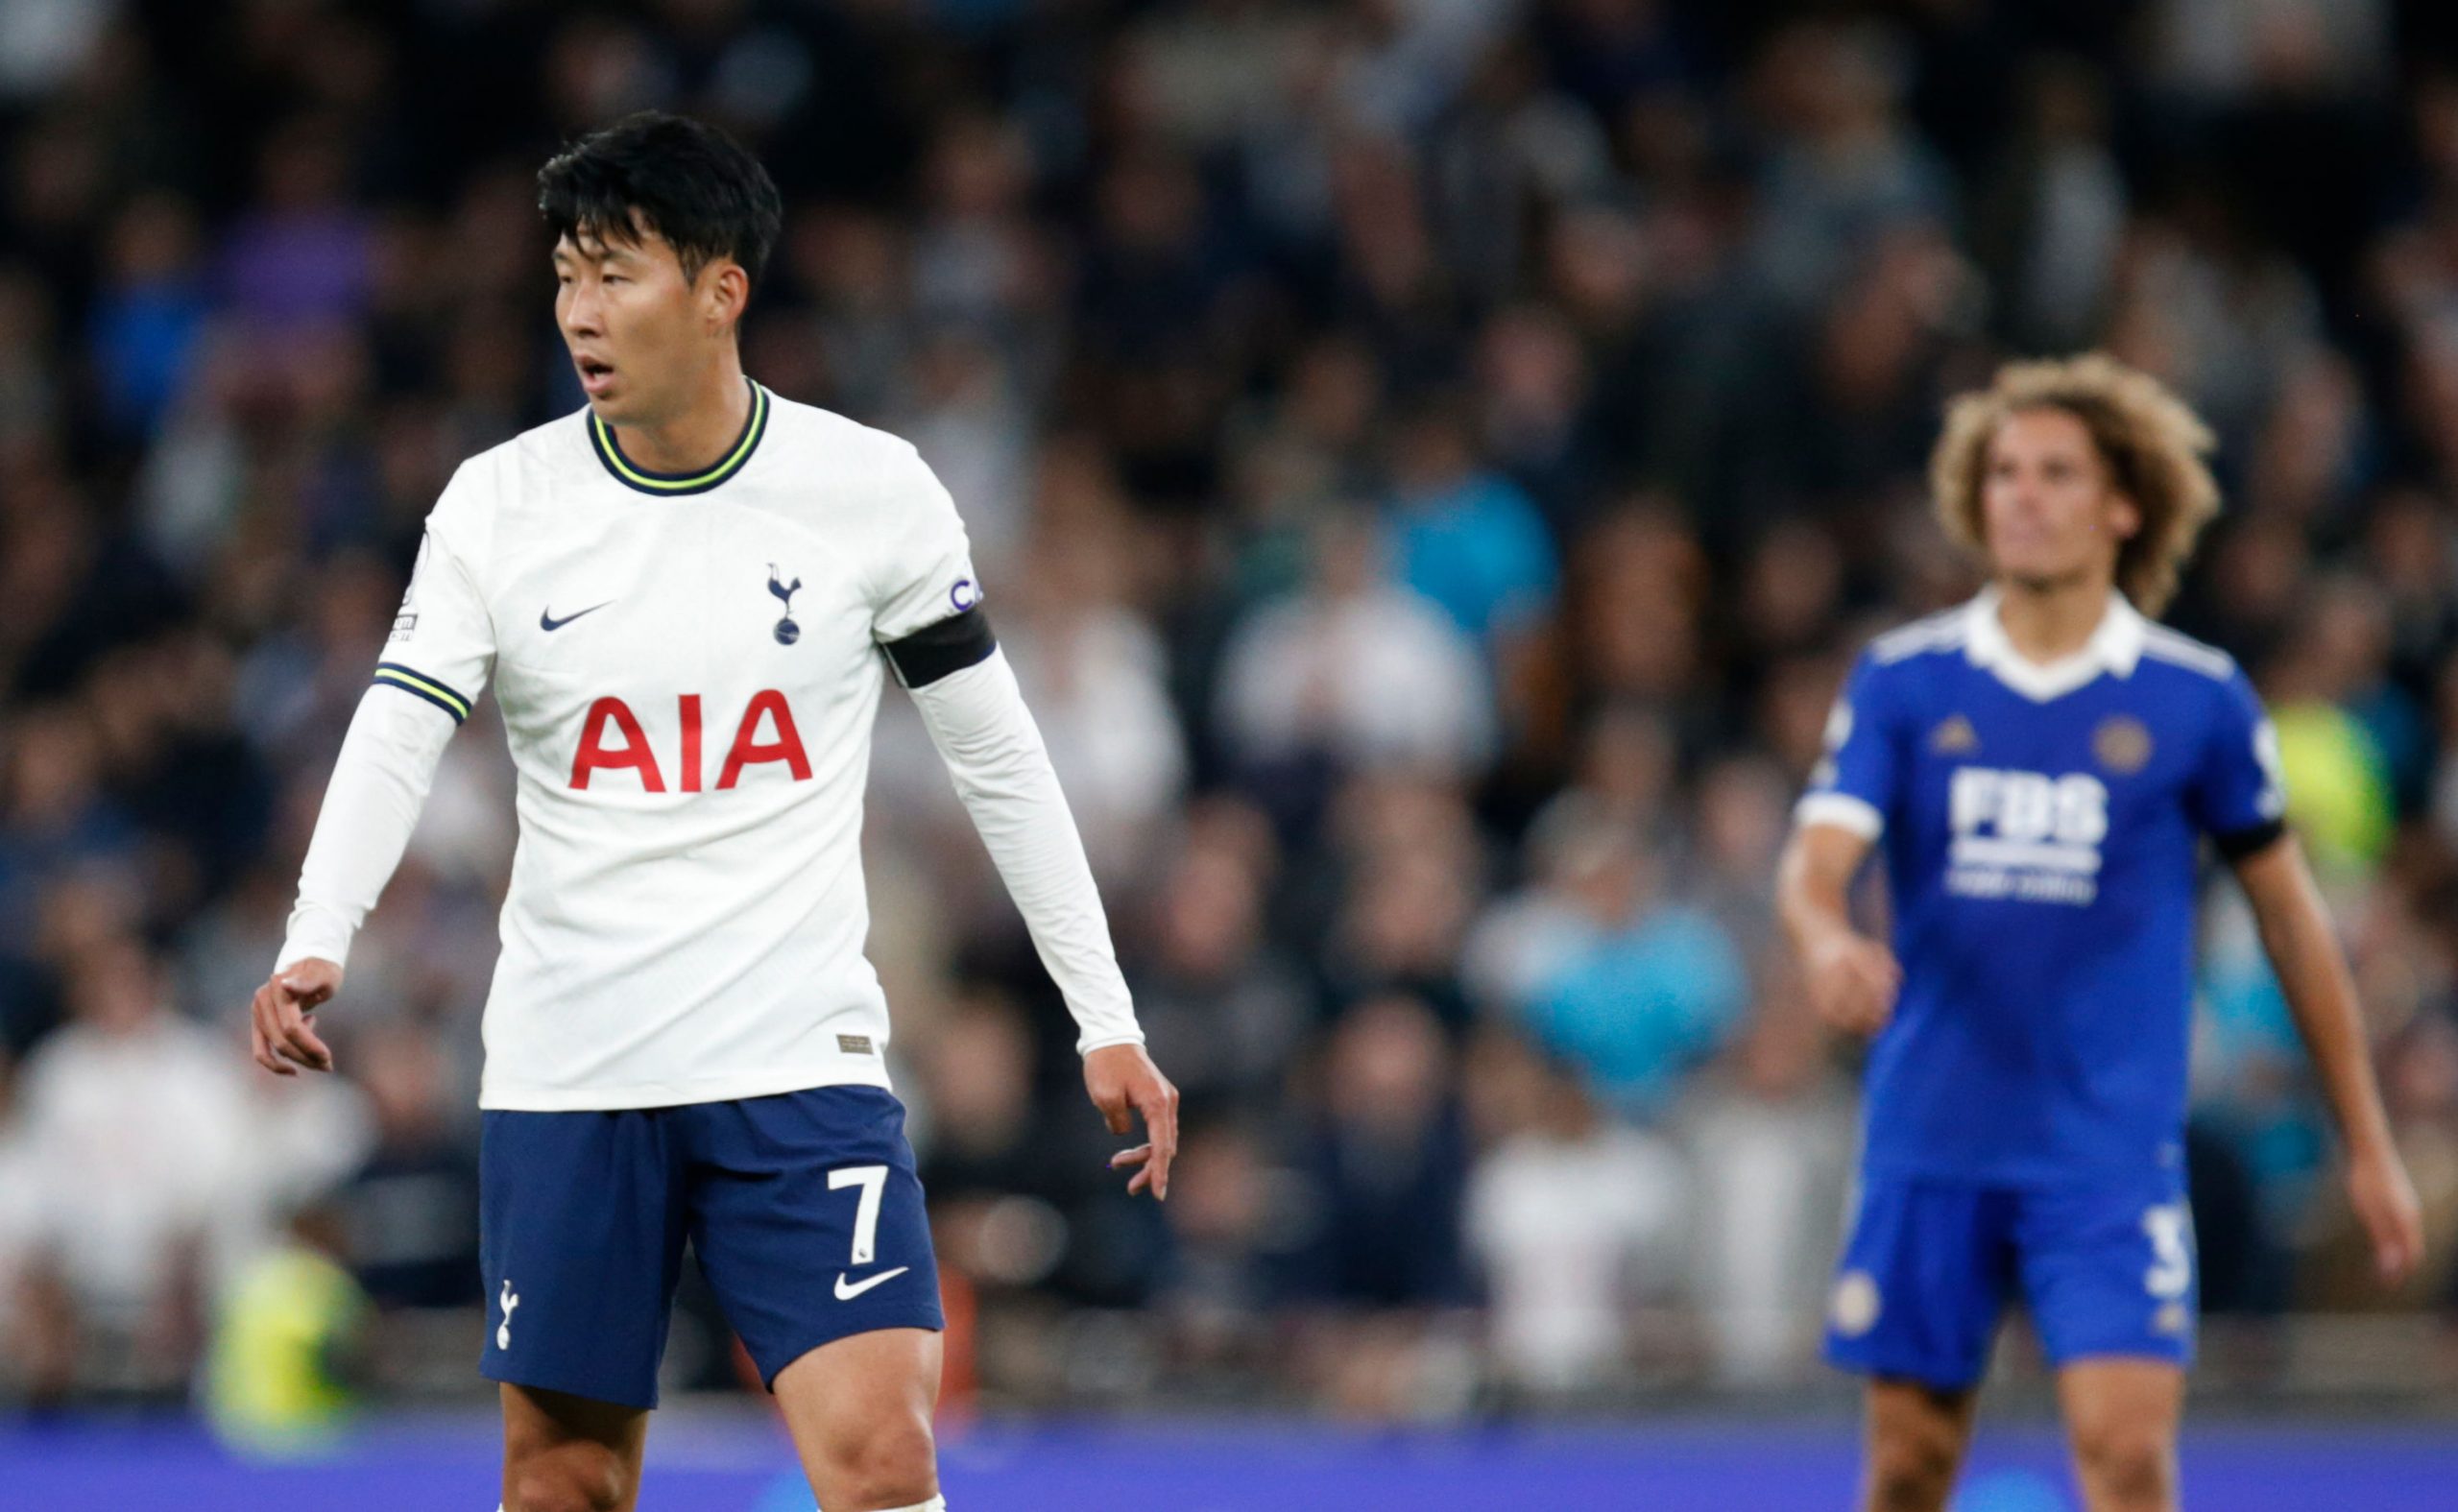 Premier League: Son Heung-min ends 8-match goal drought with hat-trick against Leicester City